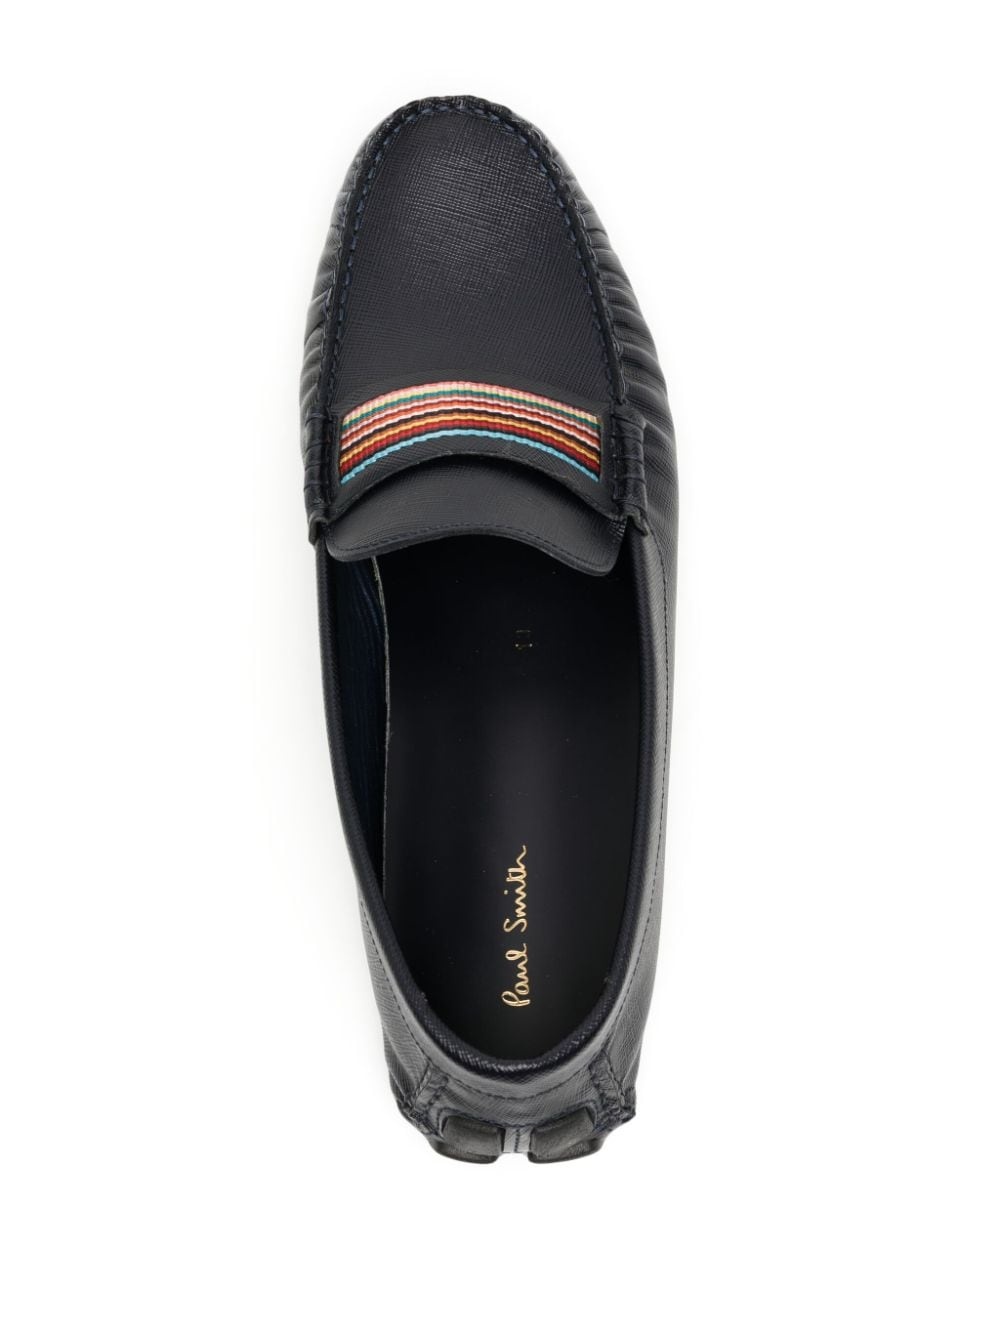 rainbow-stripe leather boat shoes - 4